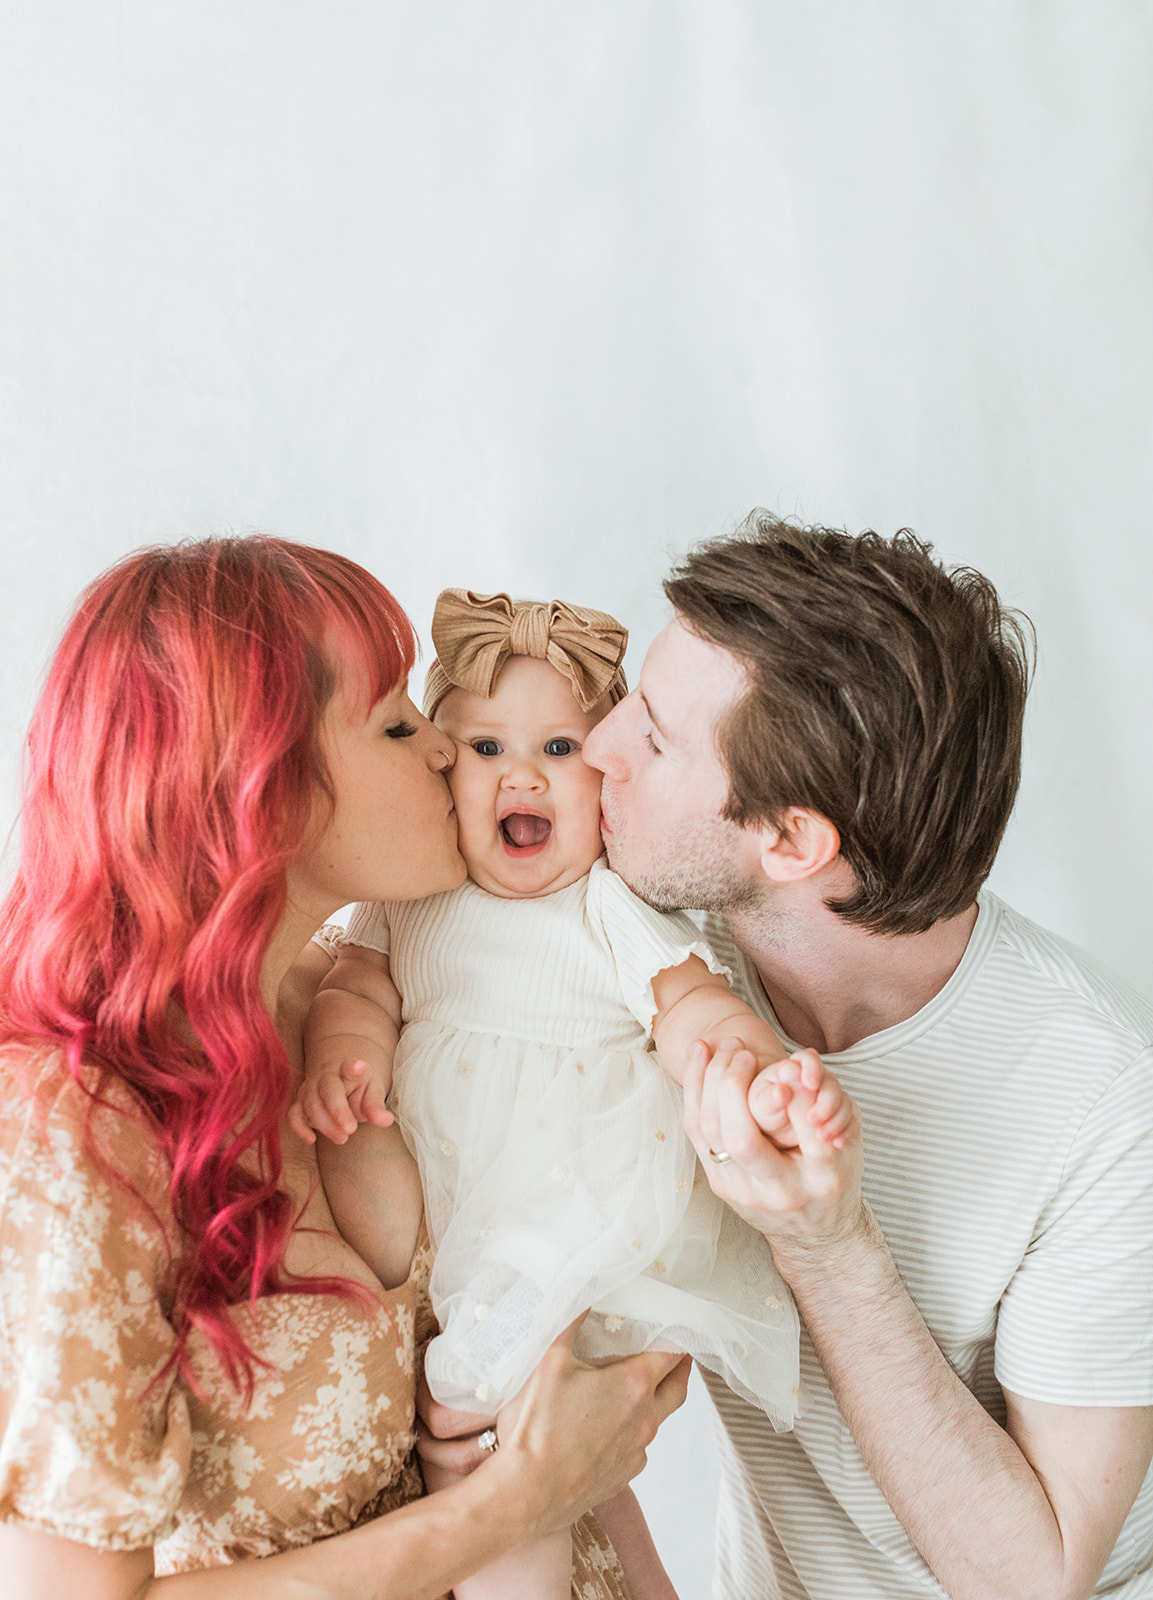 Nashville baby photographer. Family of three, dad, mom and baby girl.